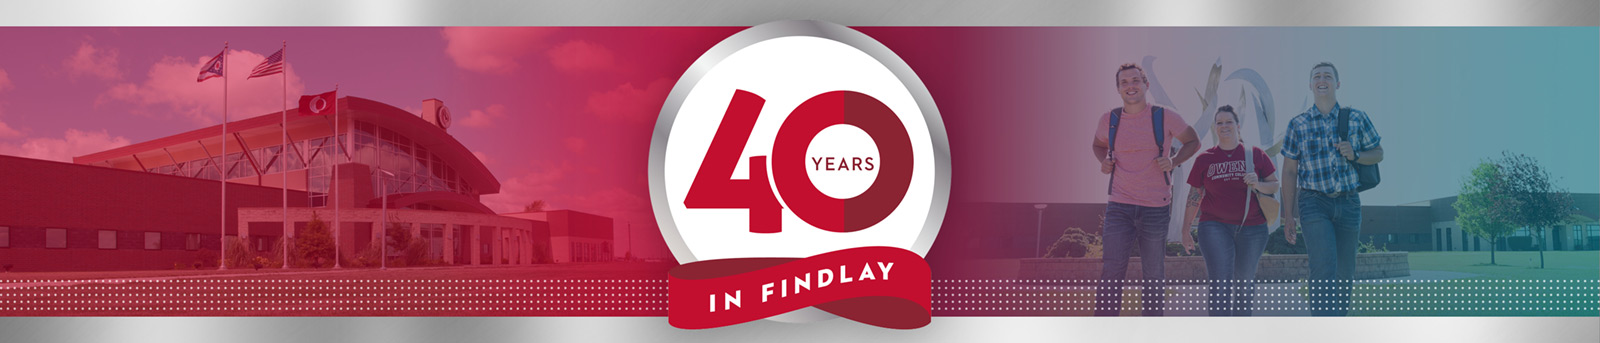 40 Years in Findlay